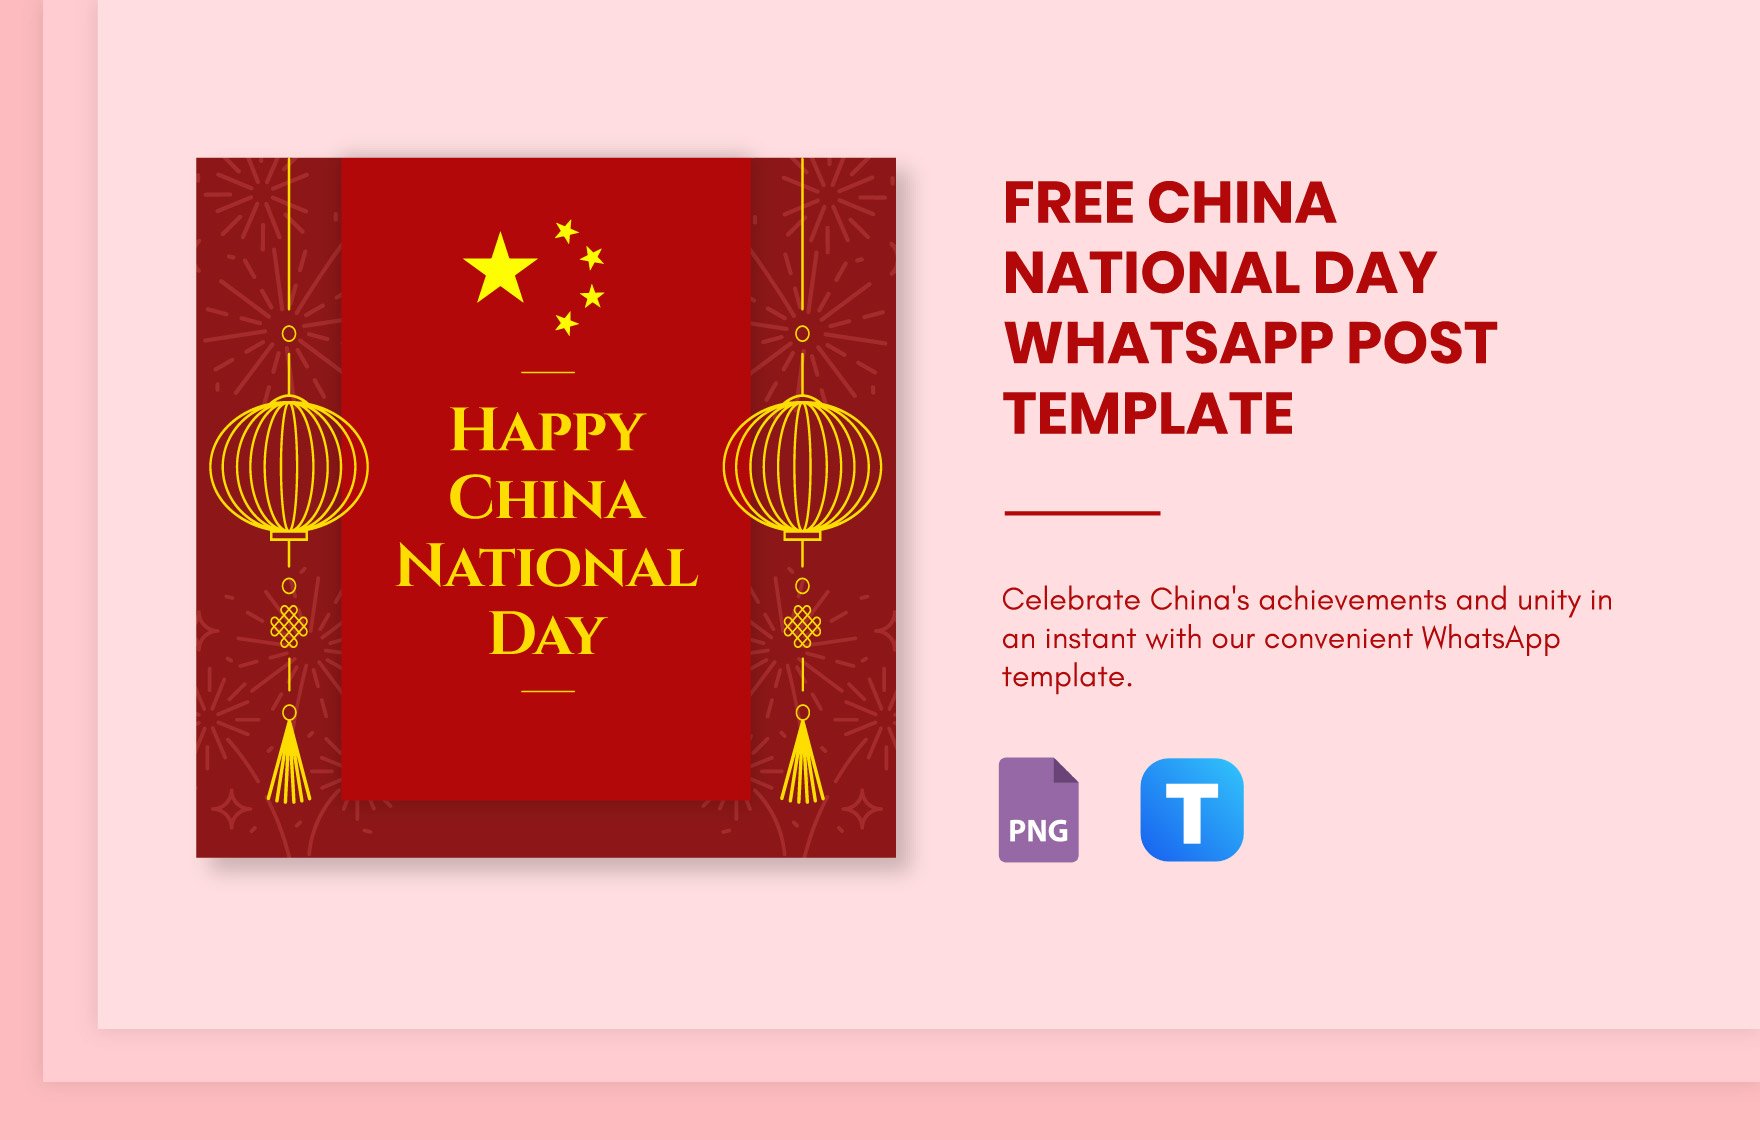 Free China National Day WhatsApp Post Template in PNG